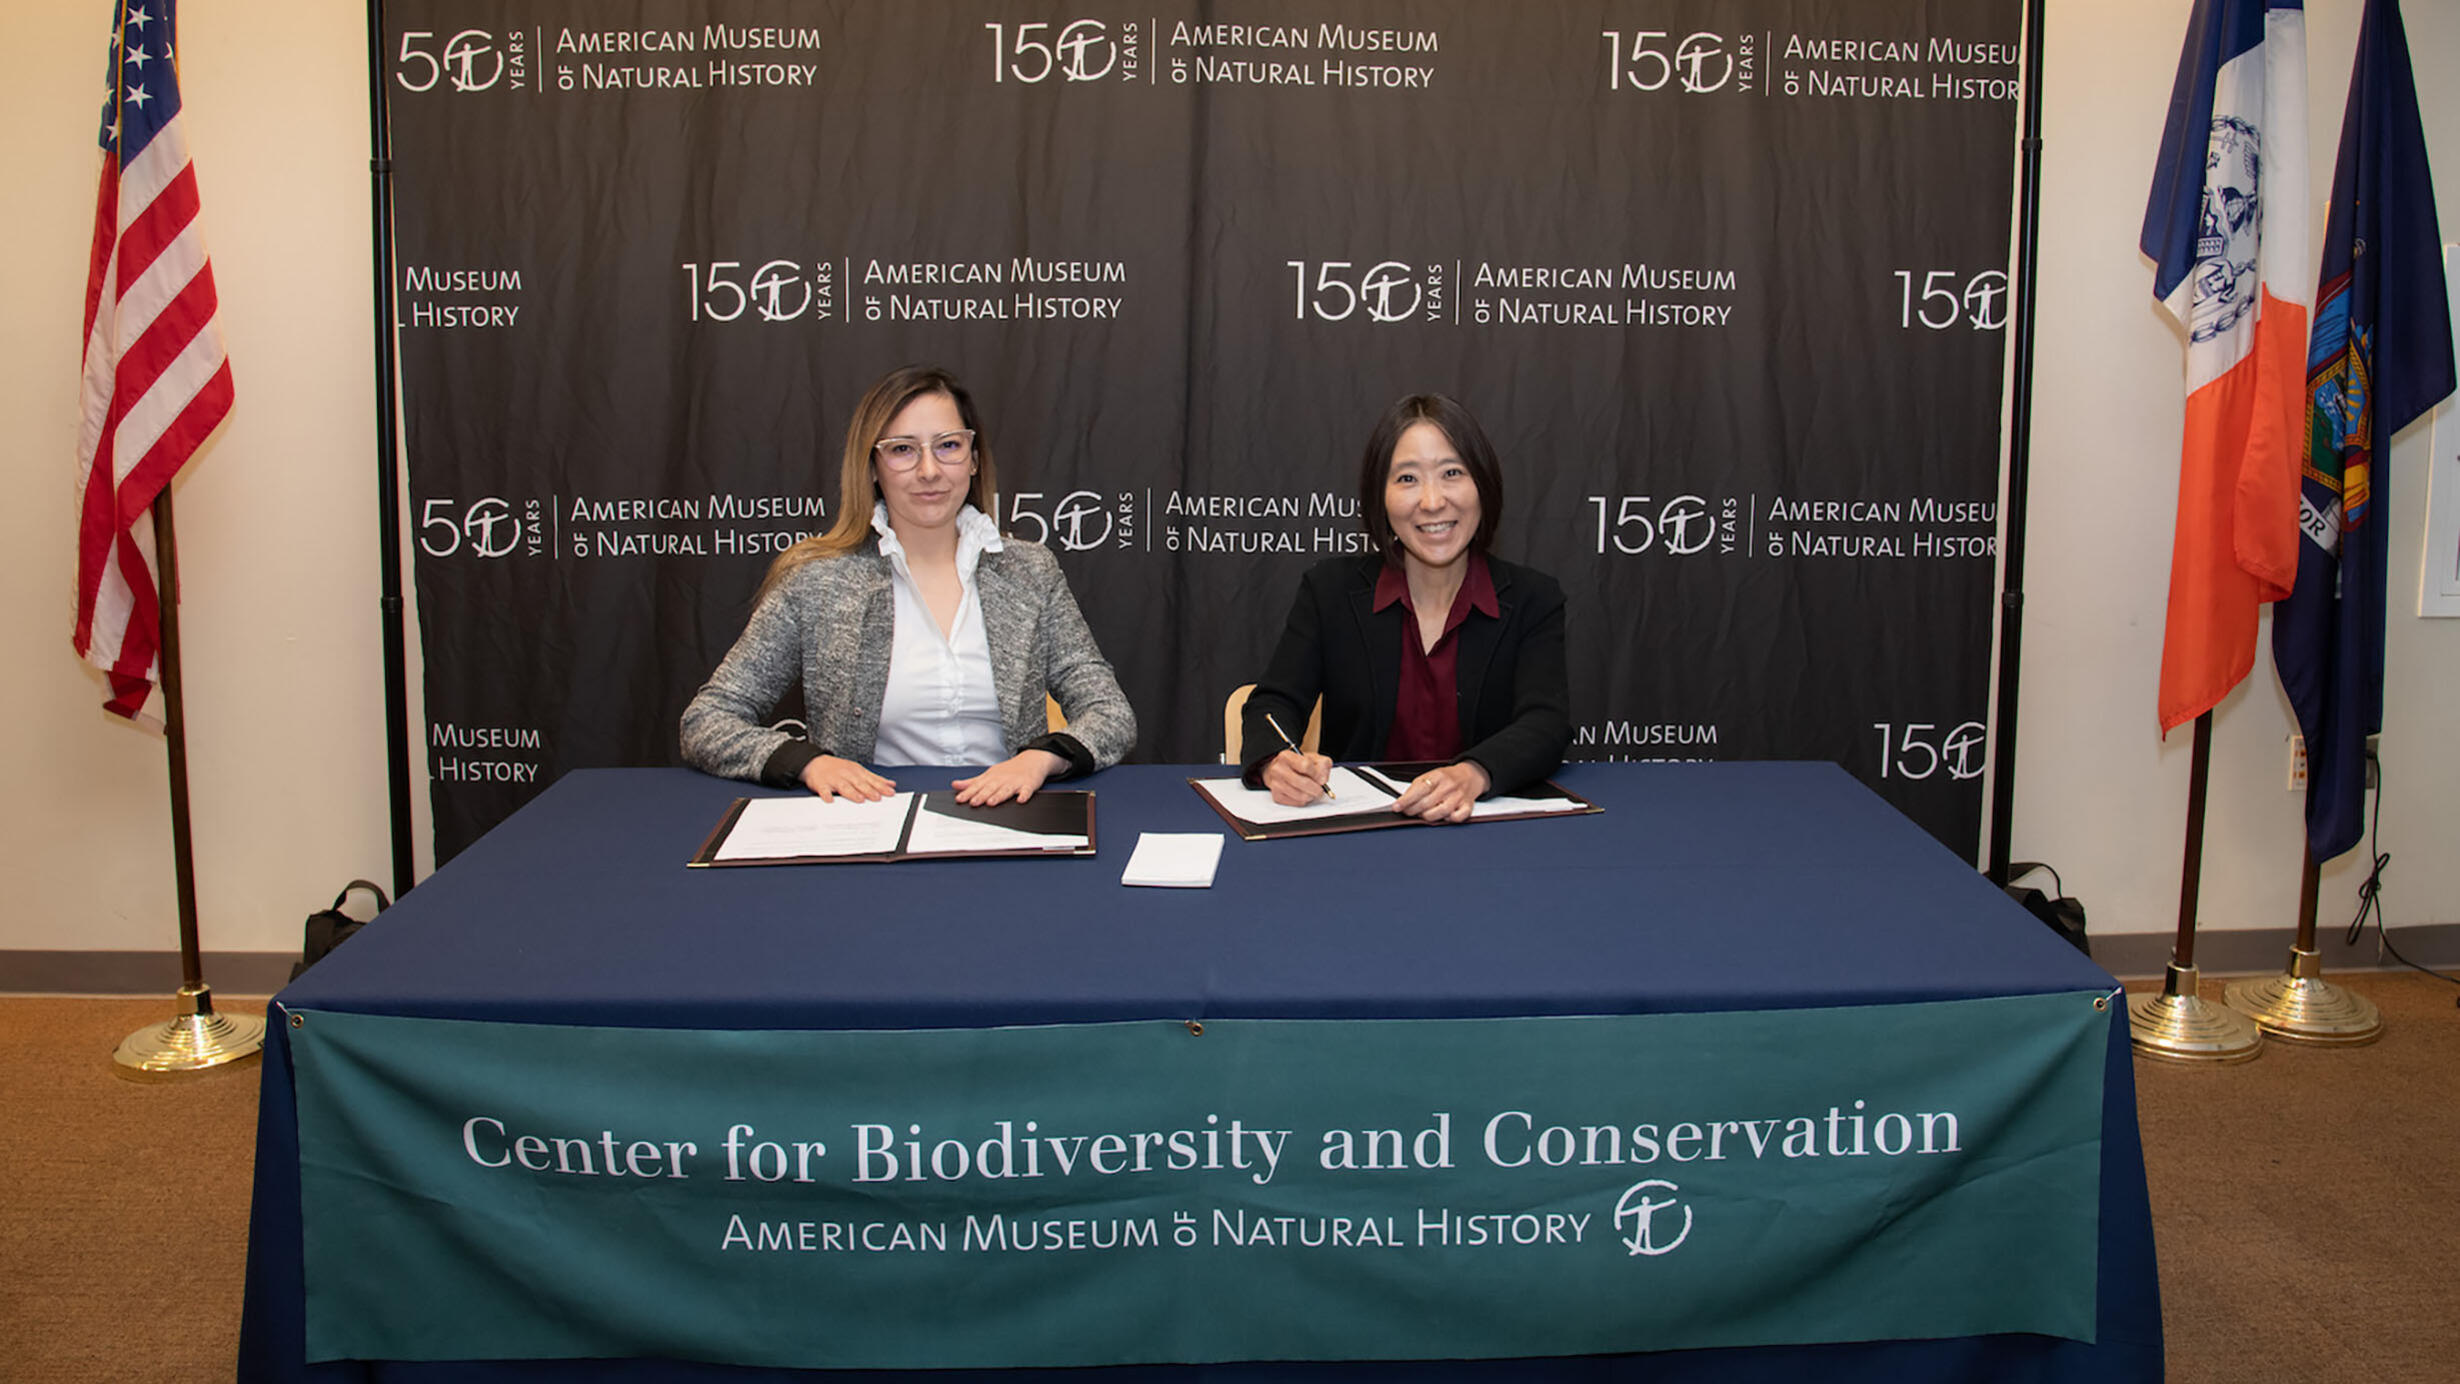 Two people seated at a table with a Center for Biodiversity and Conservation banner.